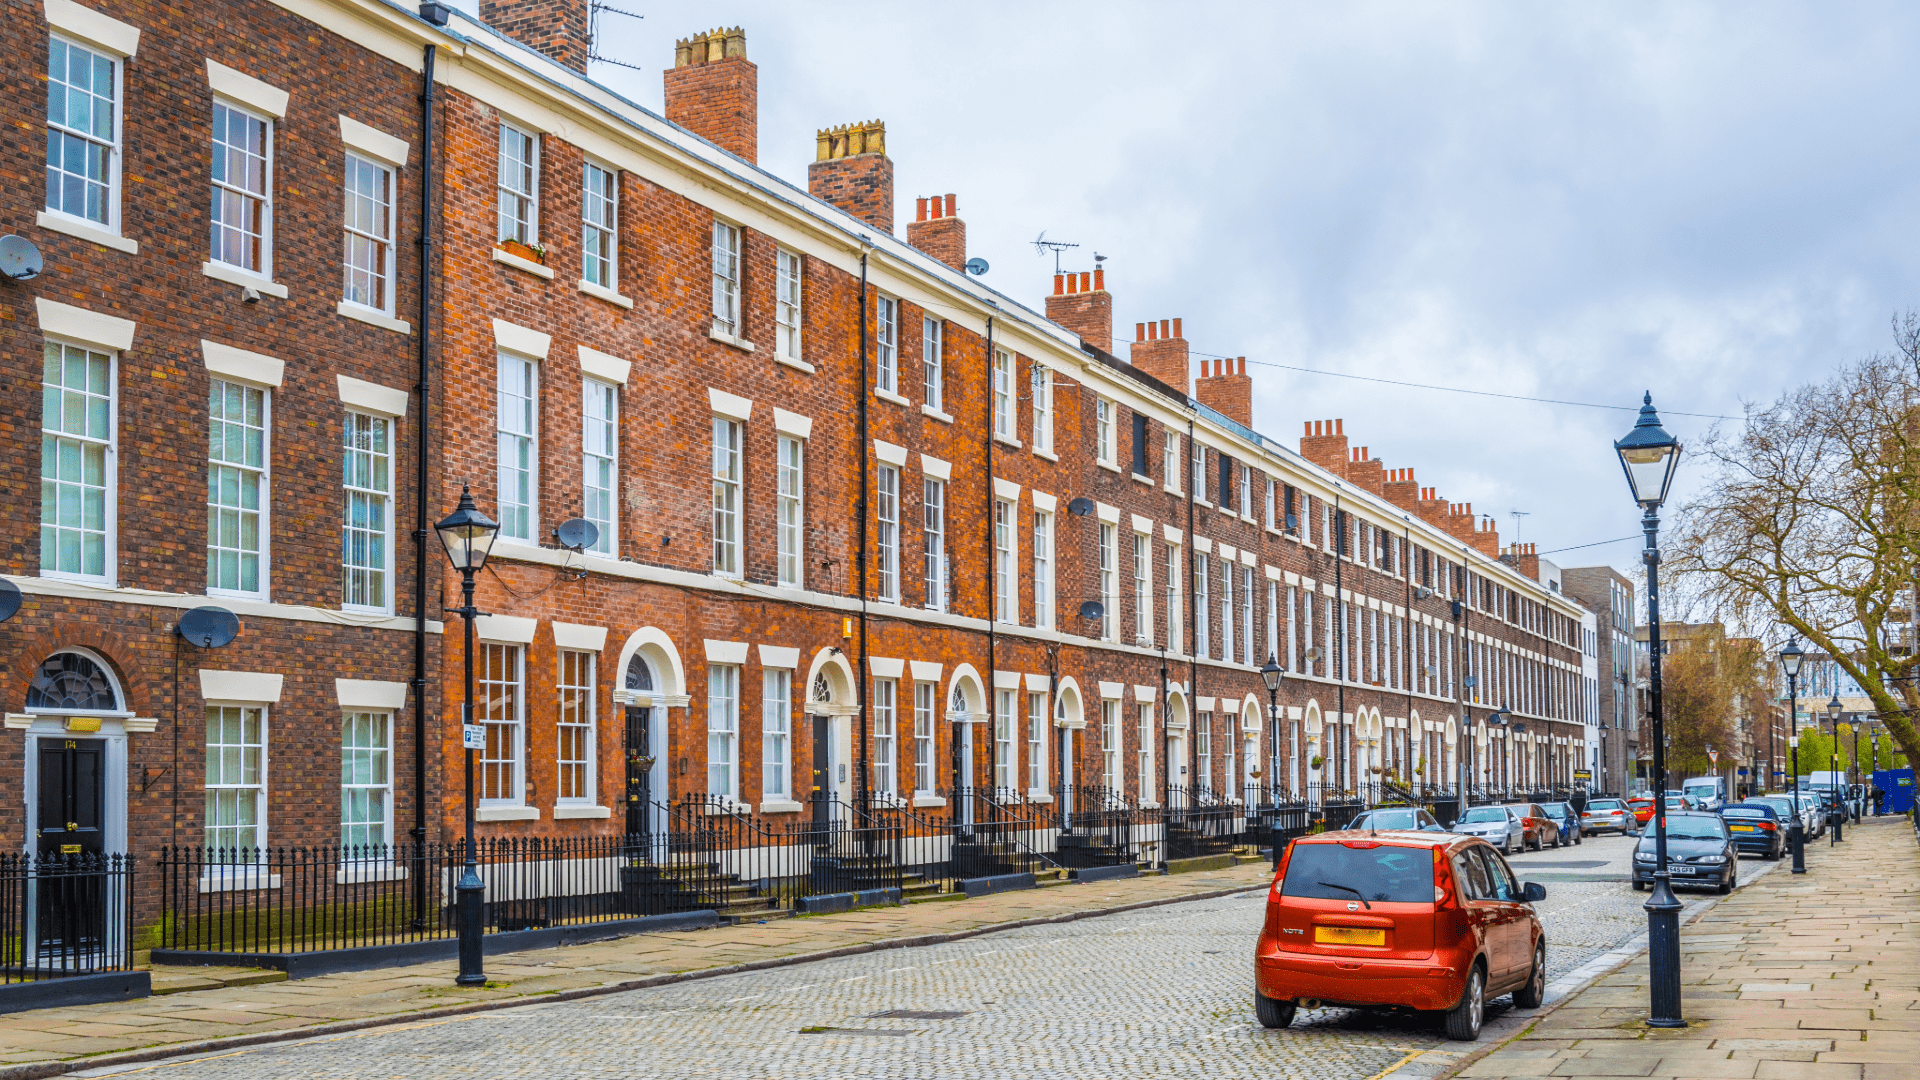 Townhouses in the UK